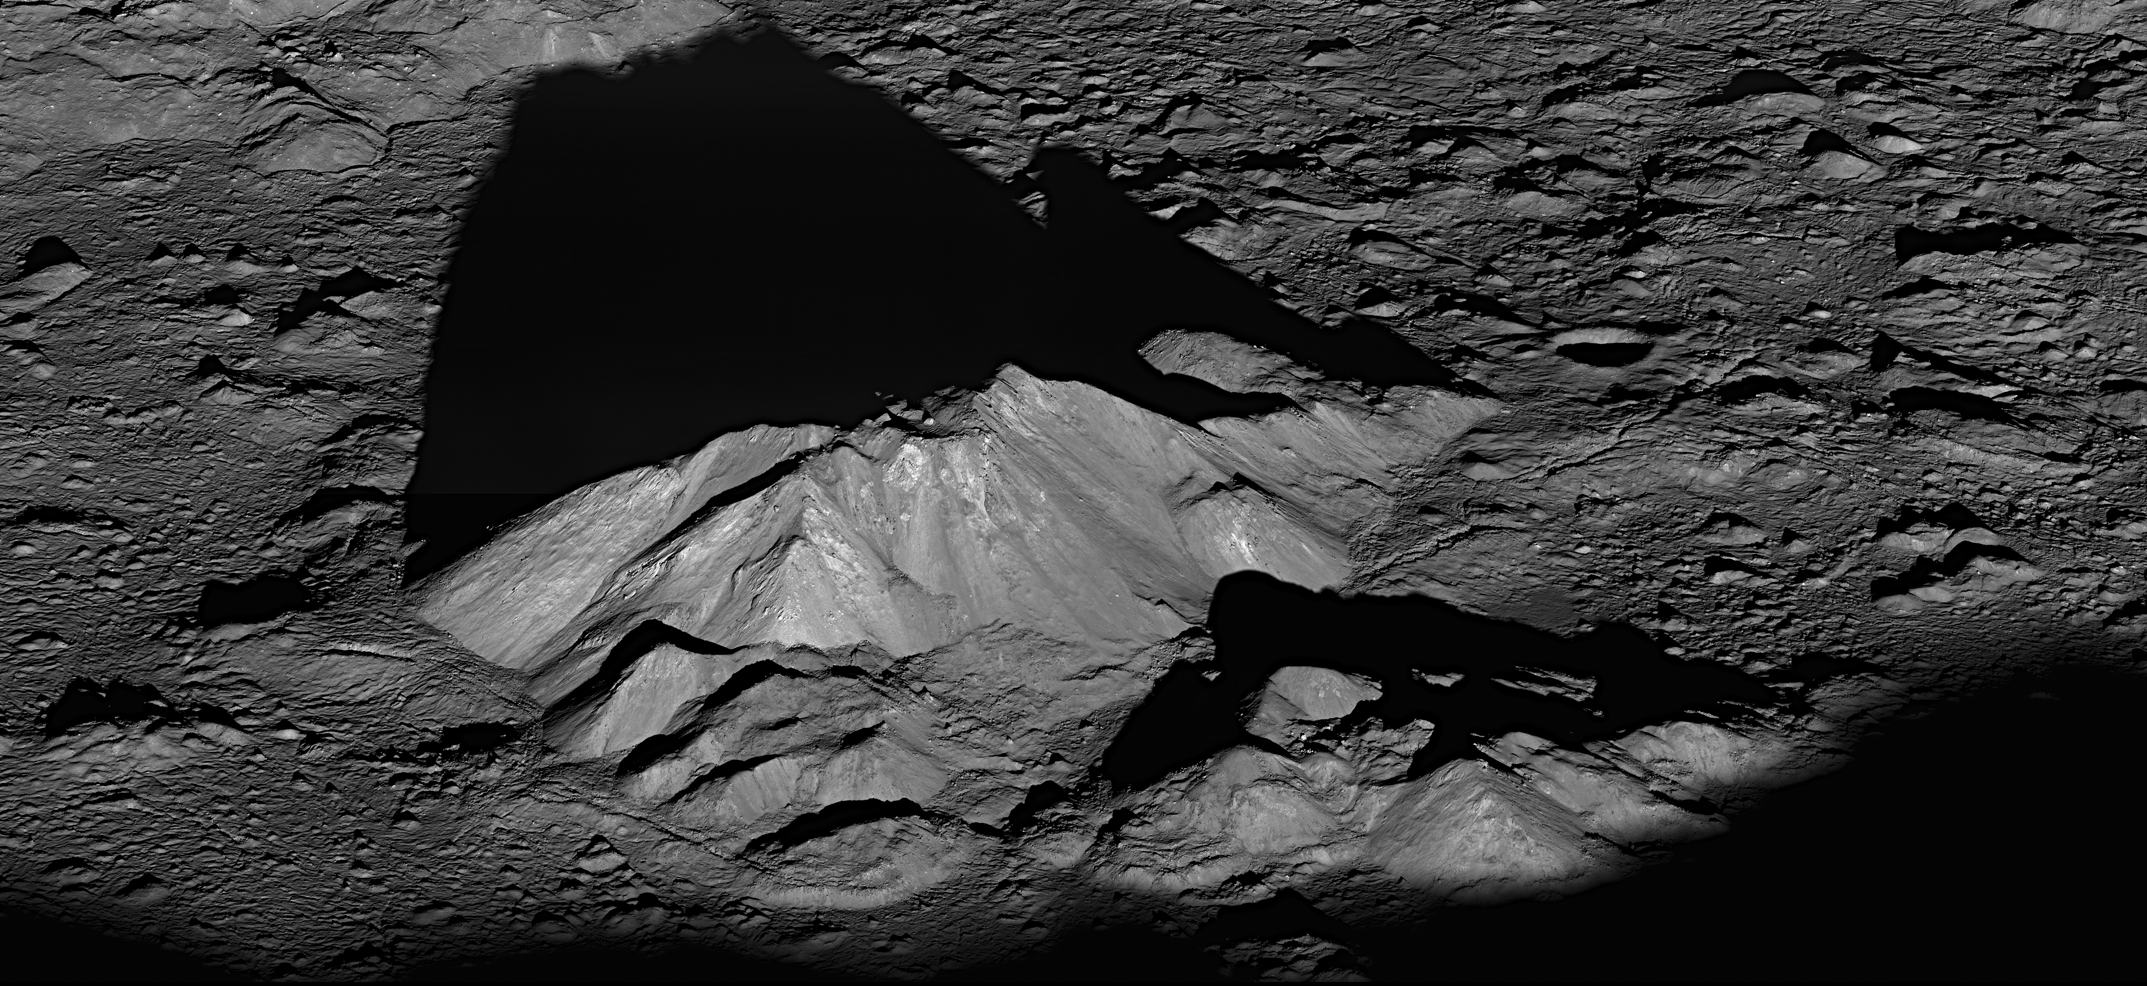 NAC oblique view of Tycho crater central peak in low-sun lighting and long shadows.